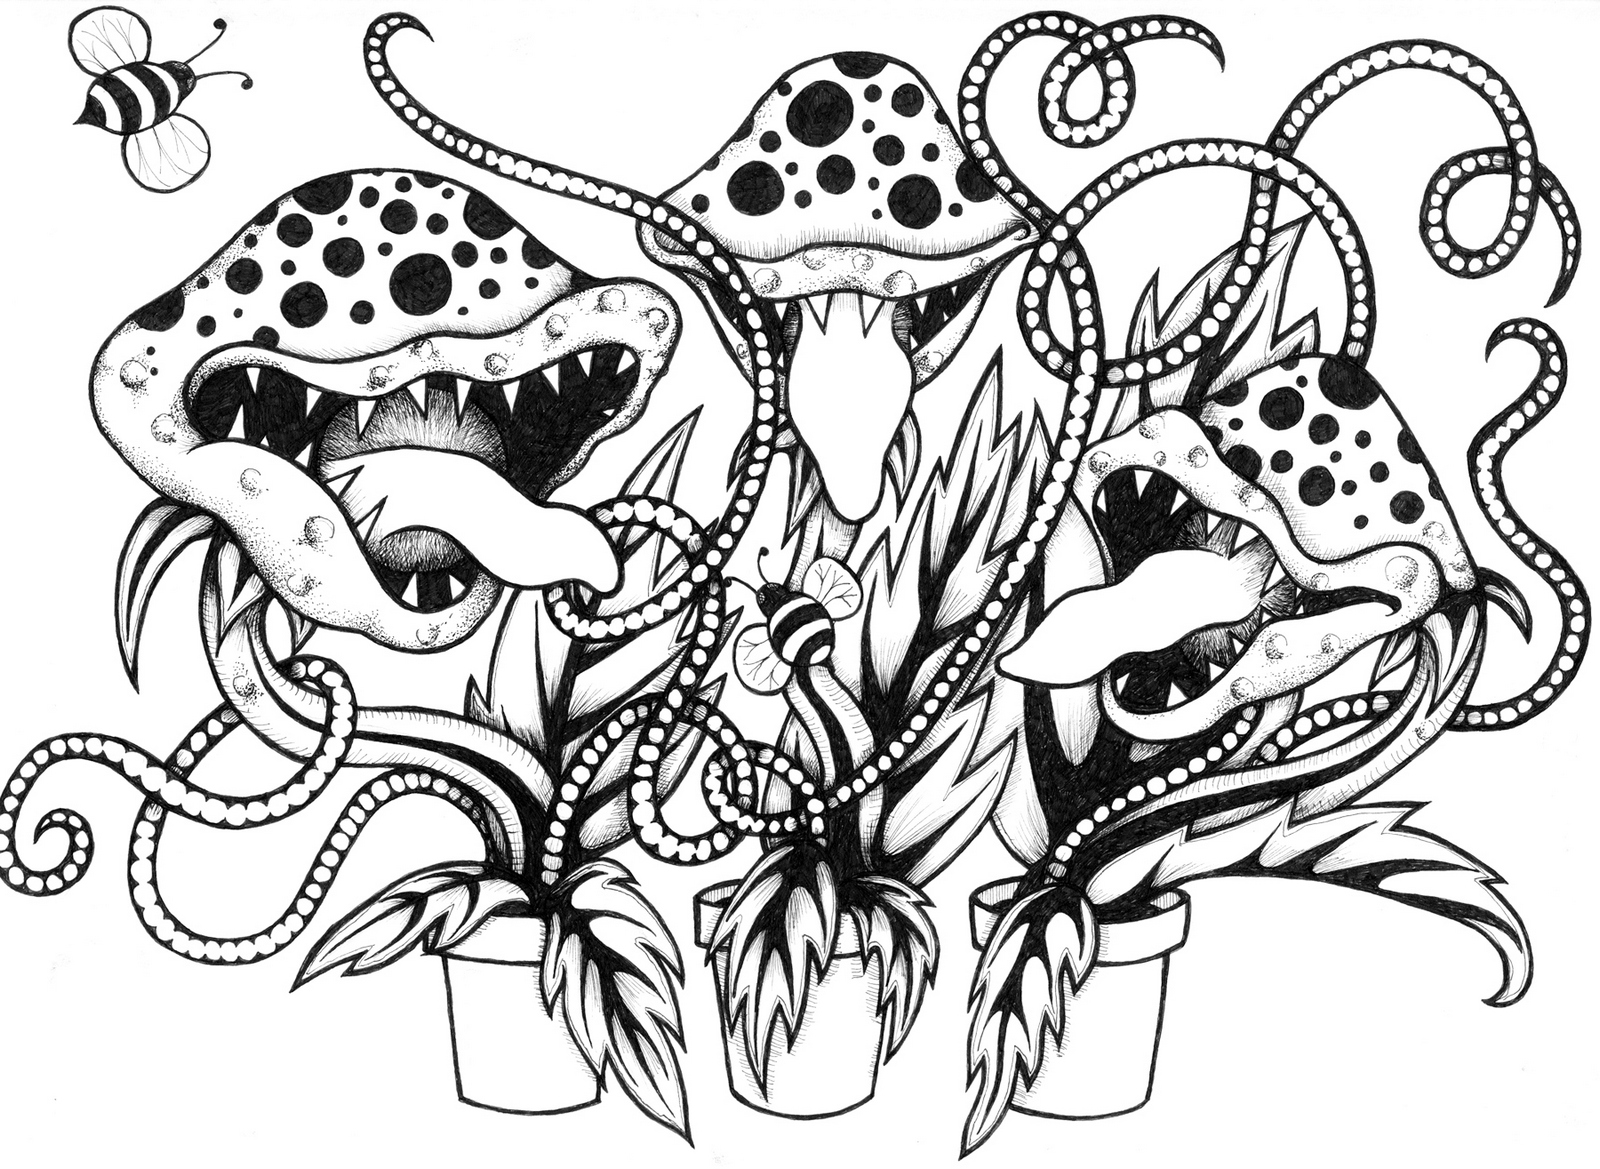 Venus Fly Trap Coloring Page Venus fly trap on pot coloring picture in 2020